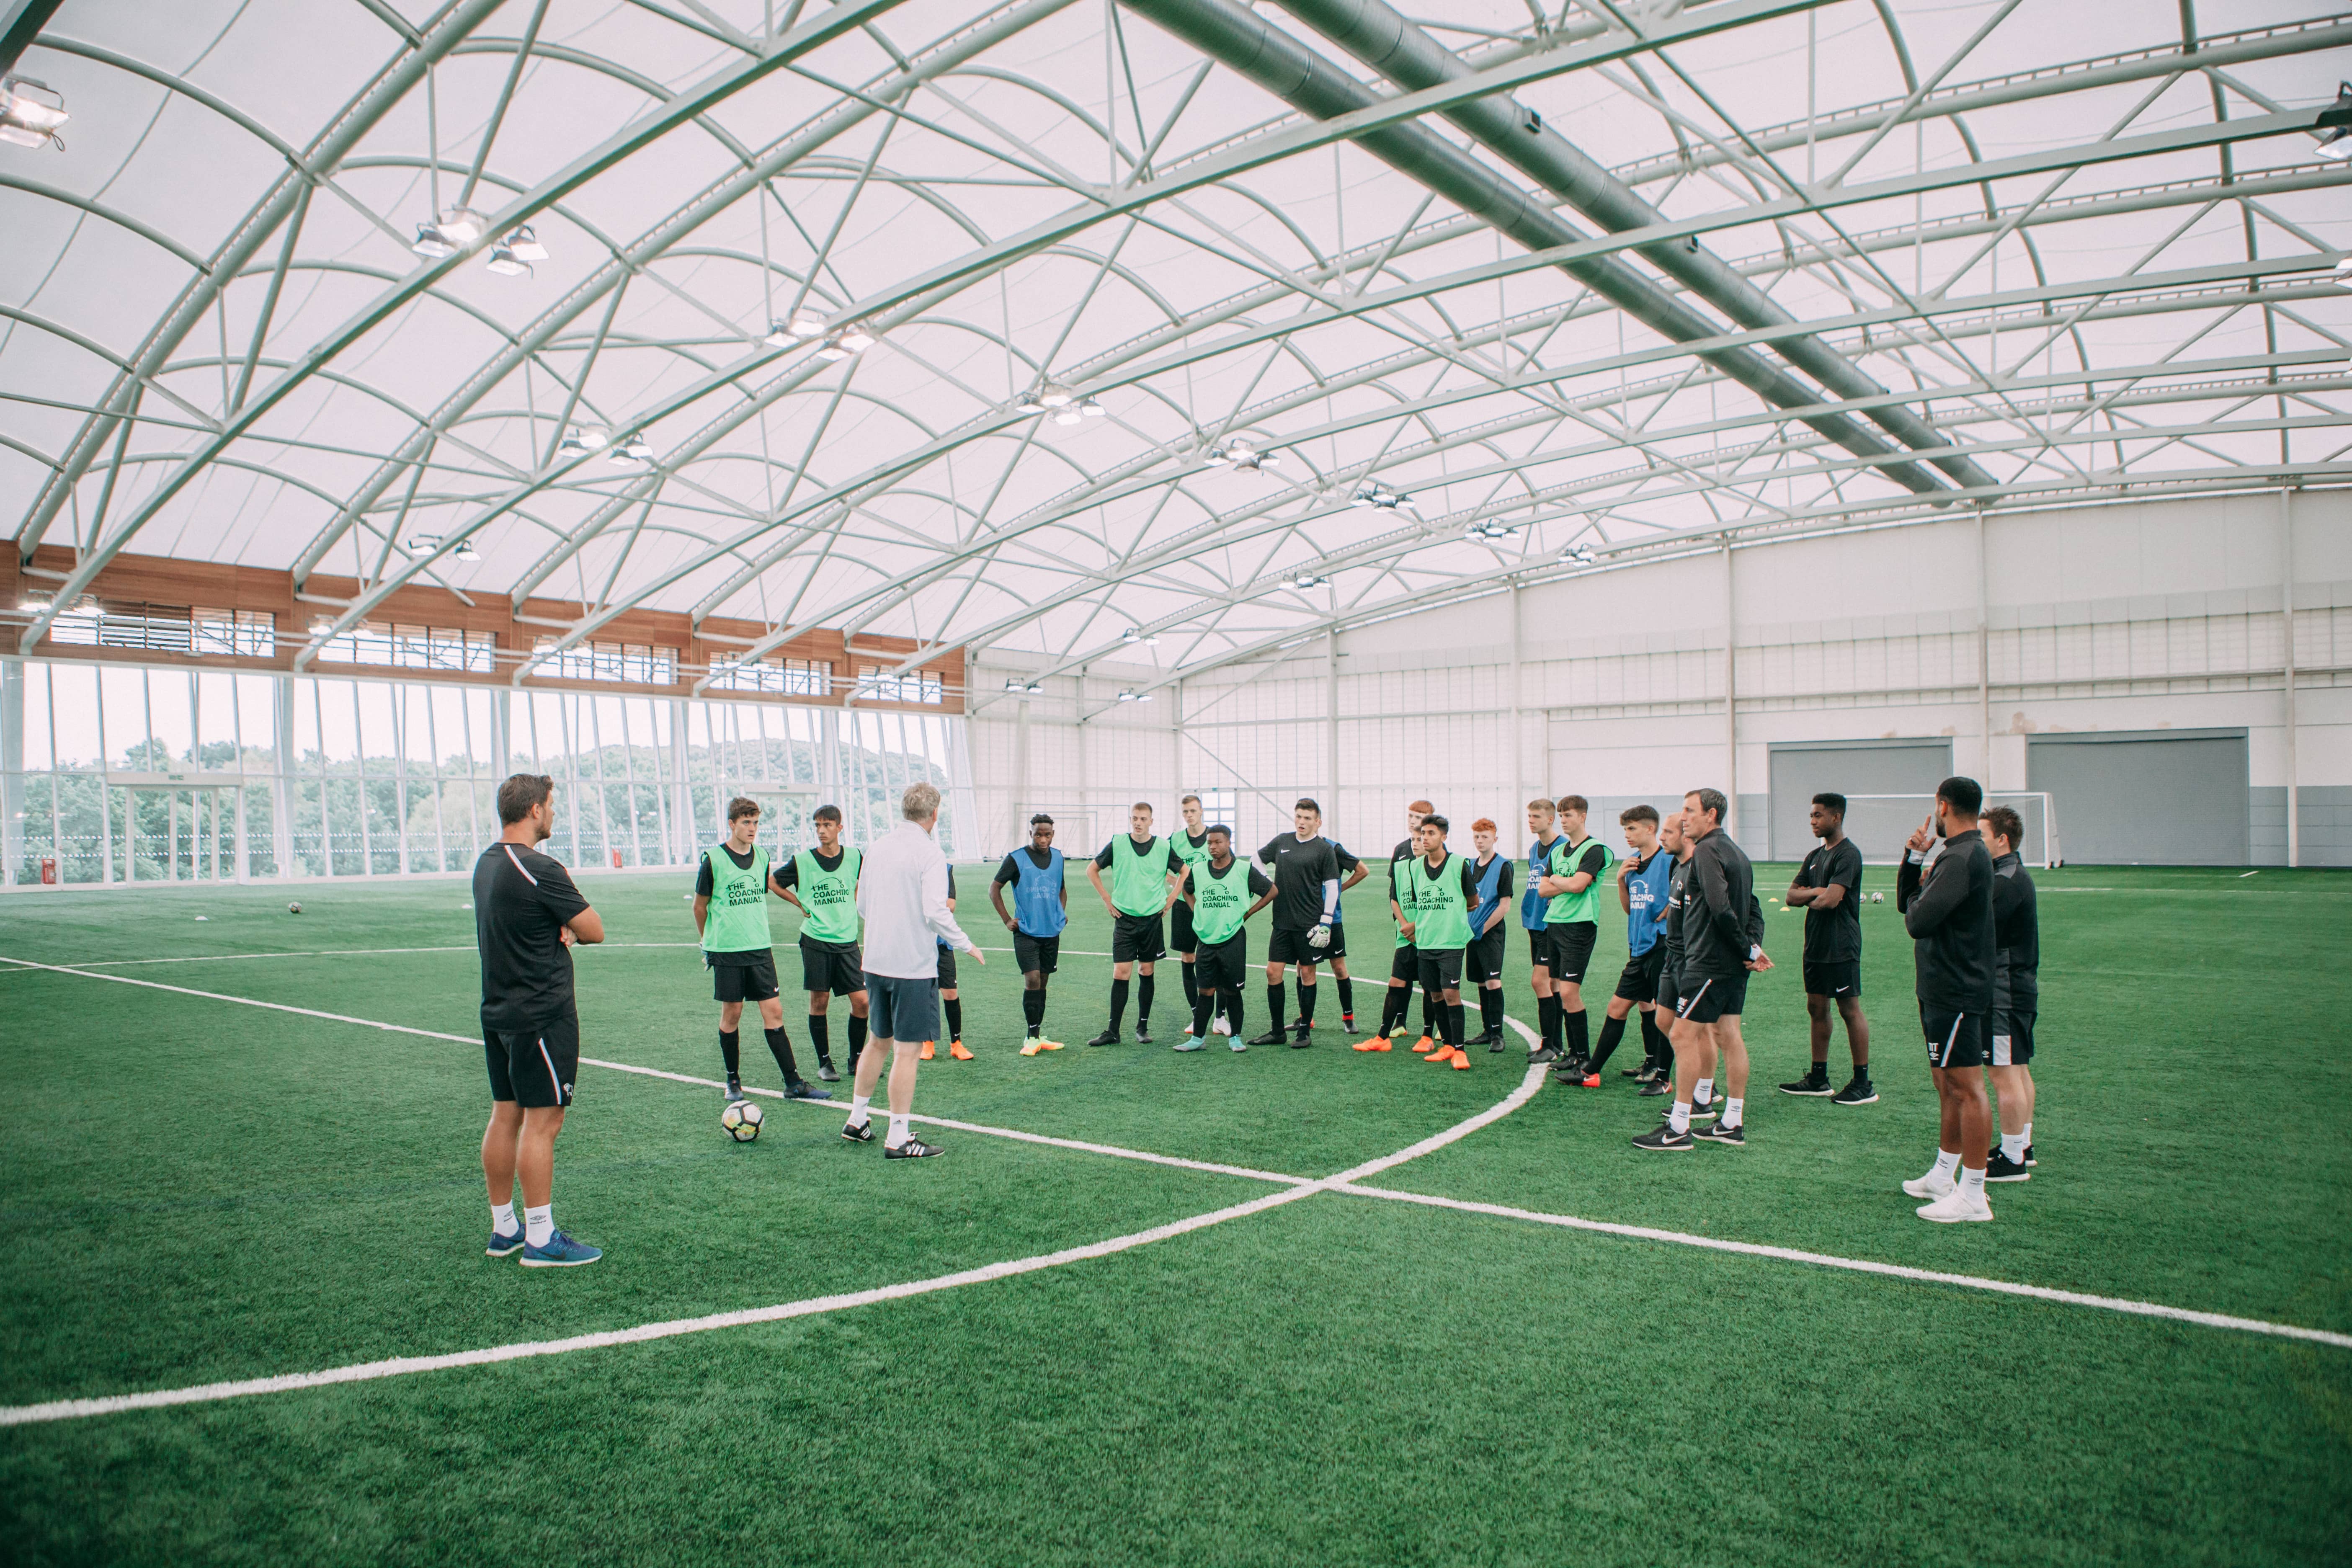 8 Best Soccer Coaching Technologies & Innovations - 2019